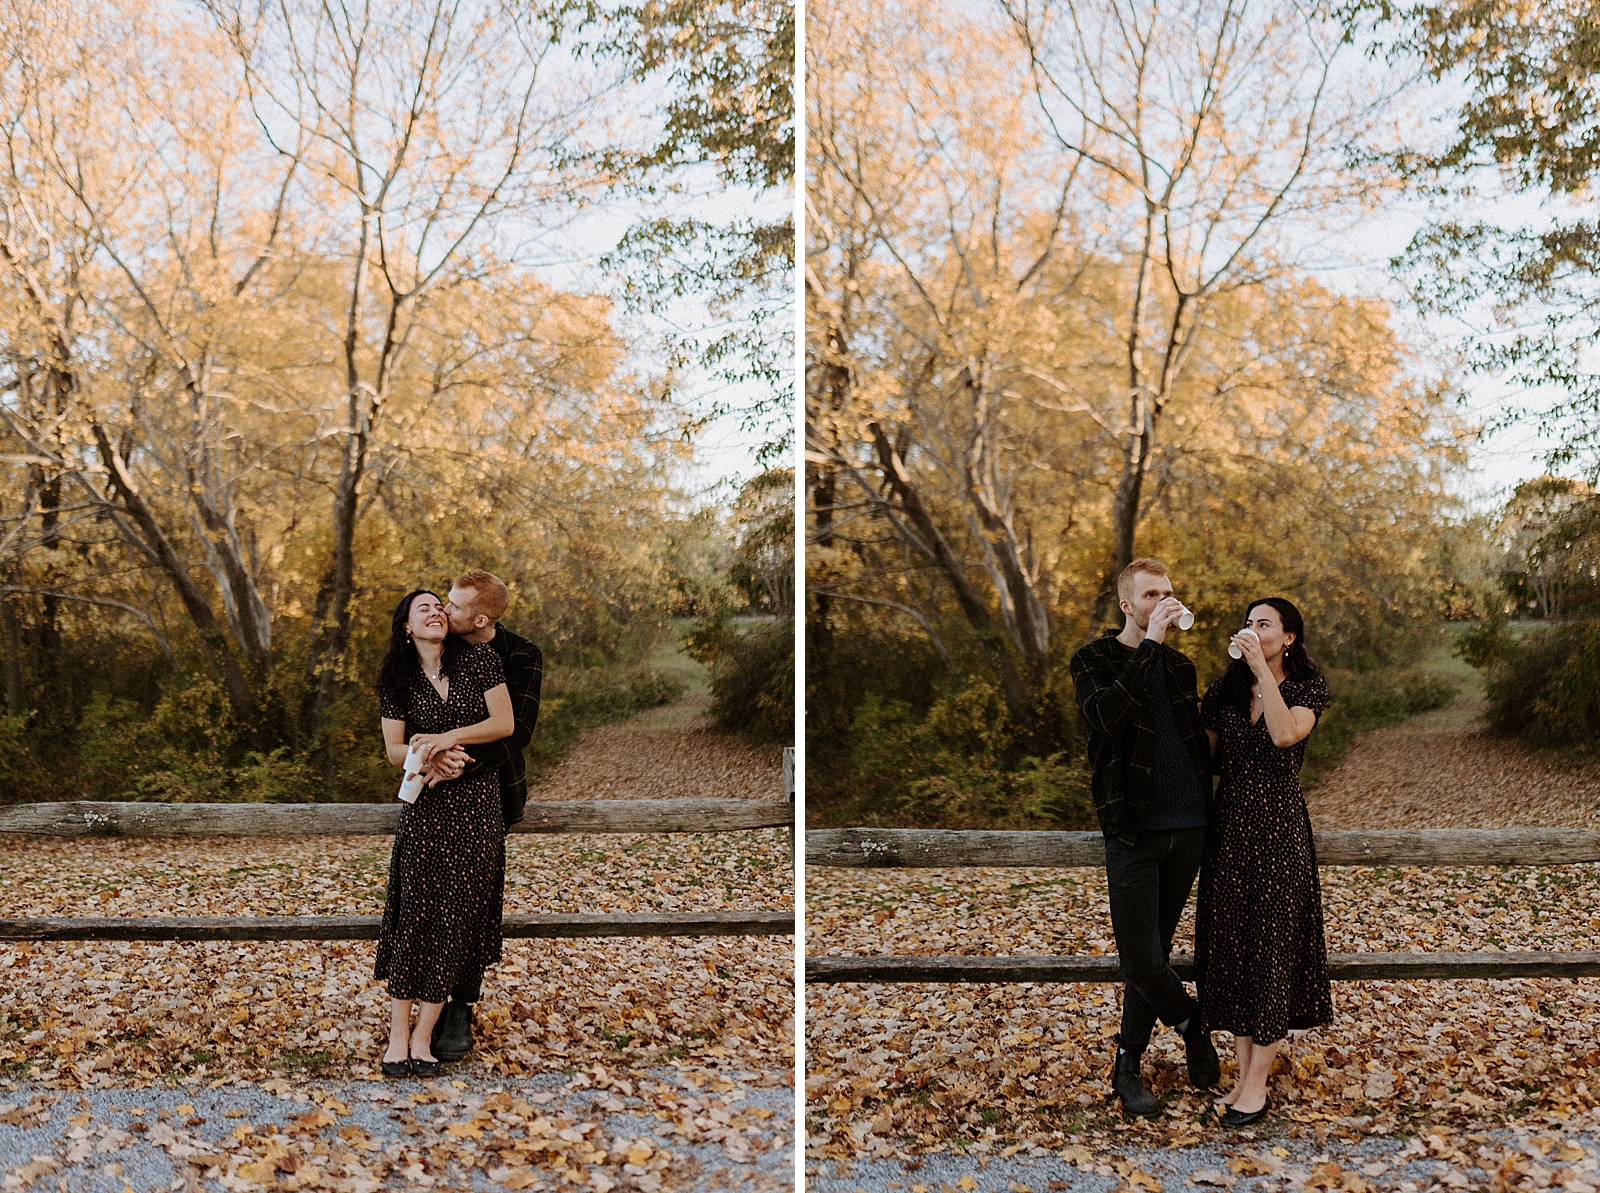 Man holding woman and kissing her on the cheek with autumn leafs on the ground